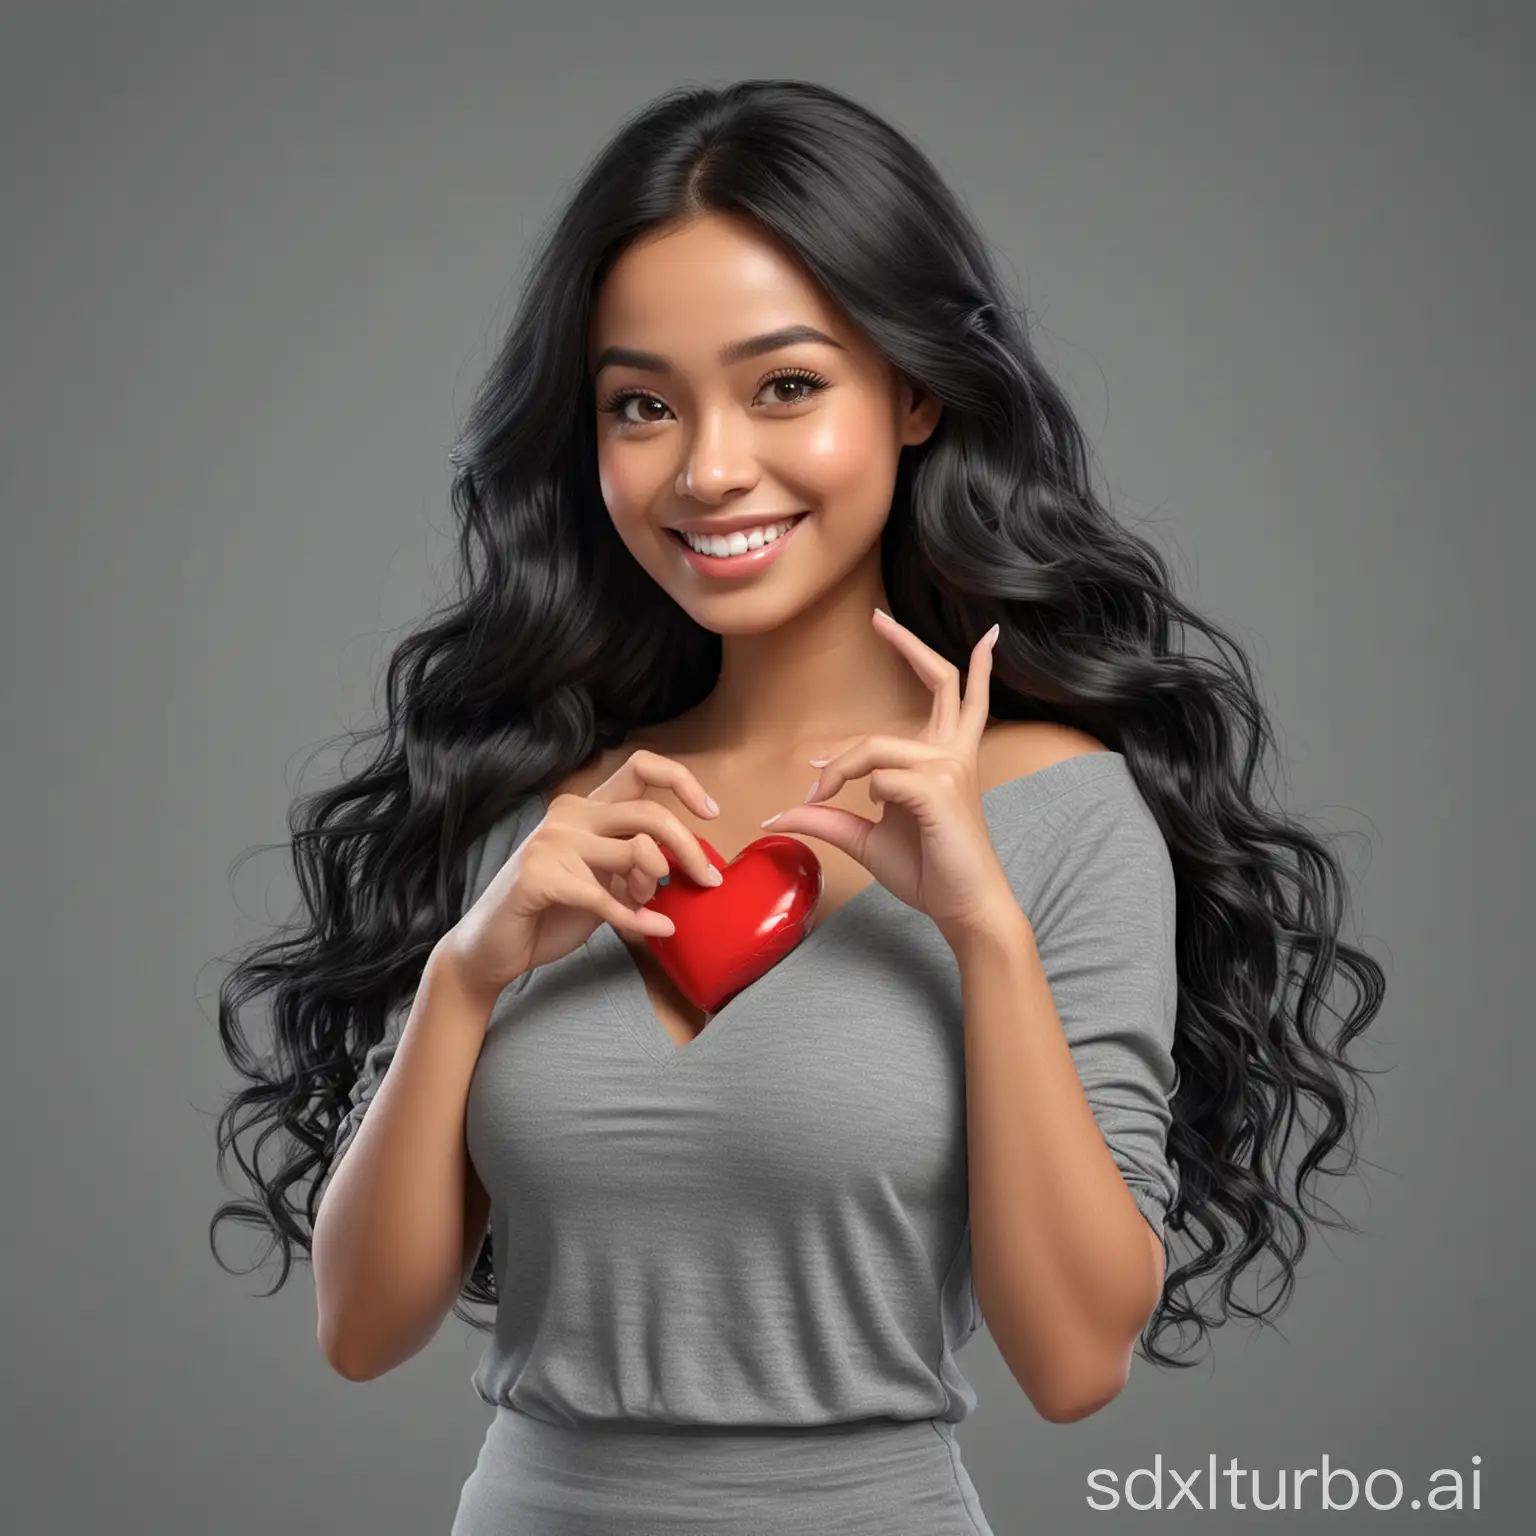 Smiling-Indonesian-Woman-Forming-Heart-Shape-with-Fingers-in-Hyperrealistic-3D-Cartoon-Style-Portrait